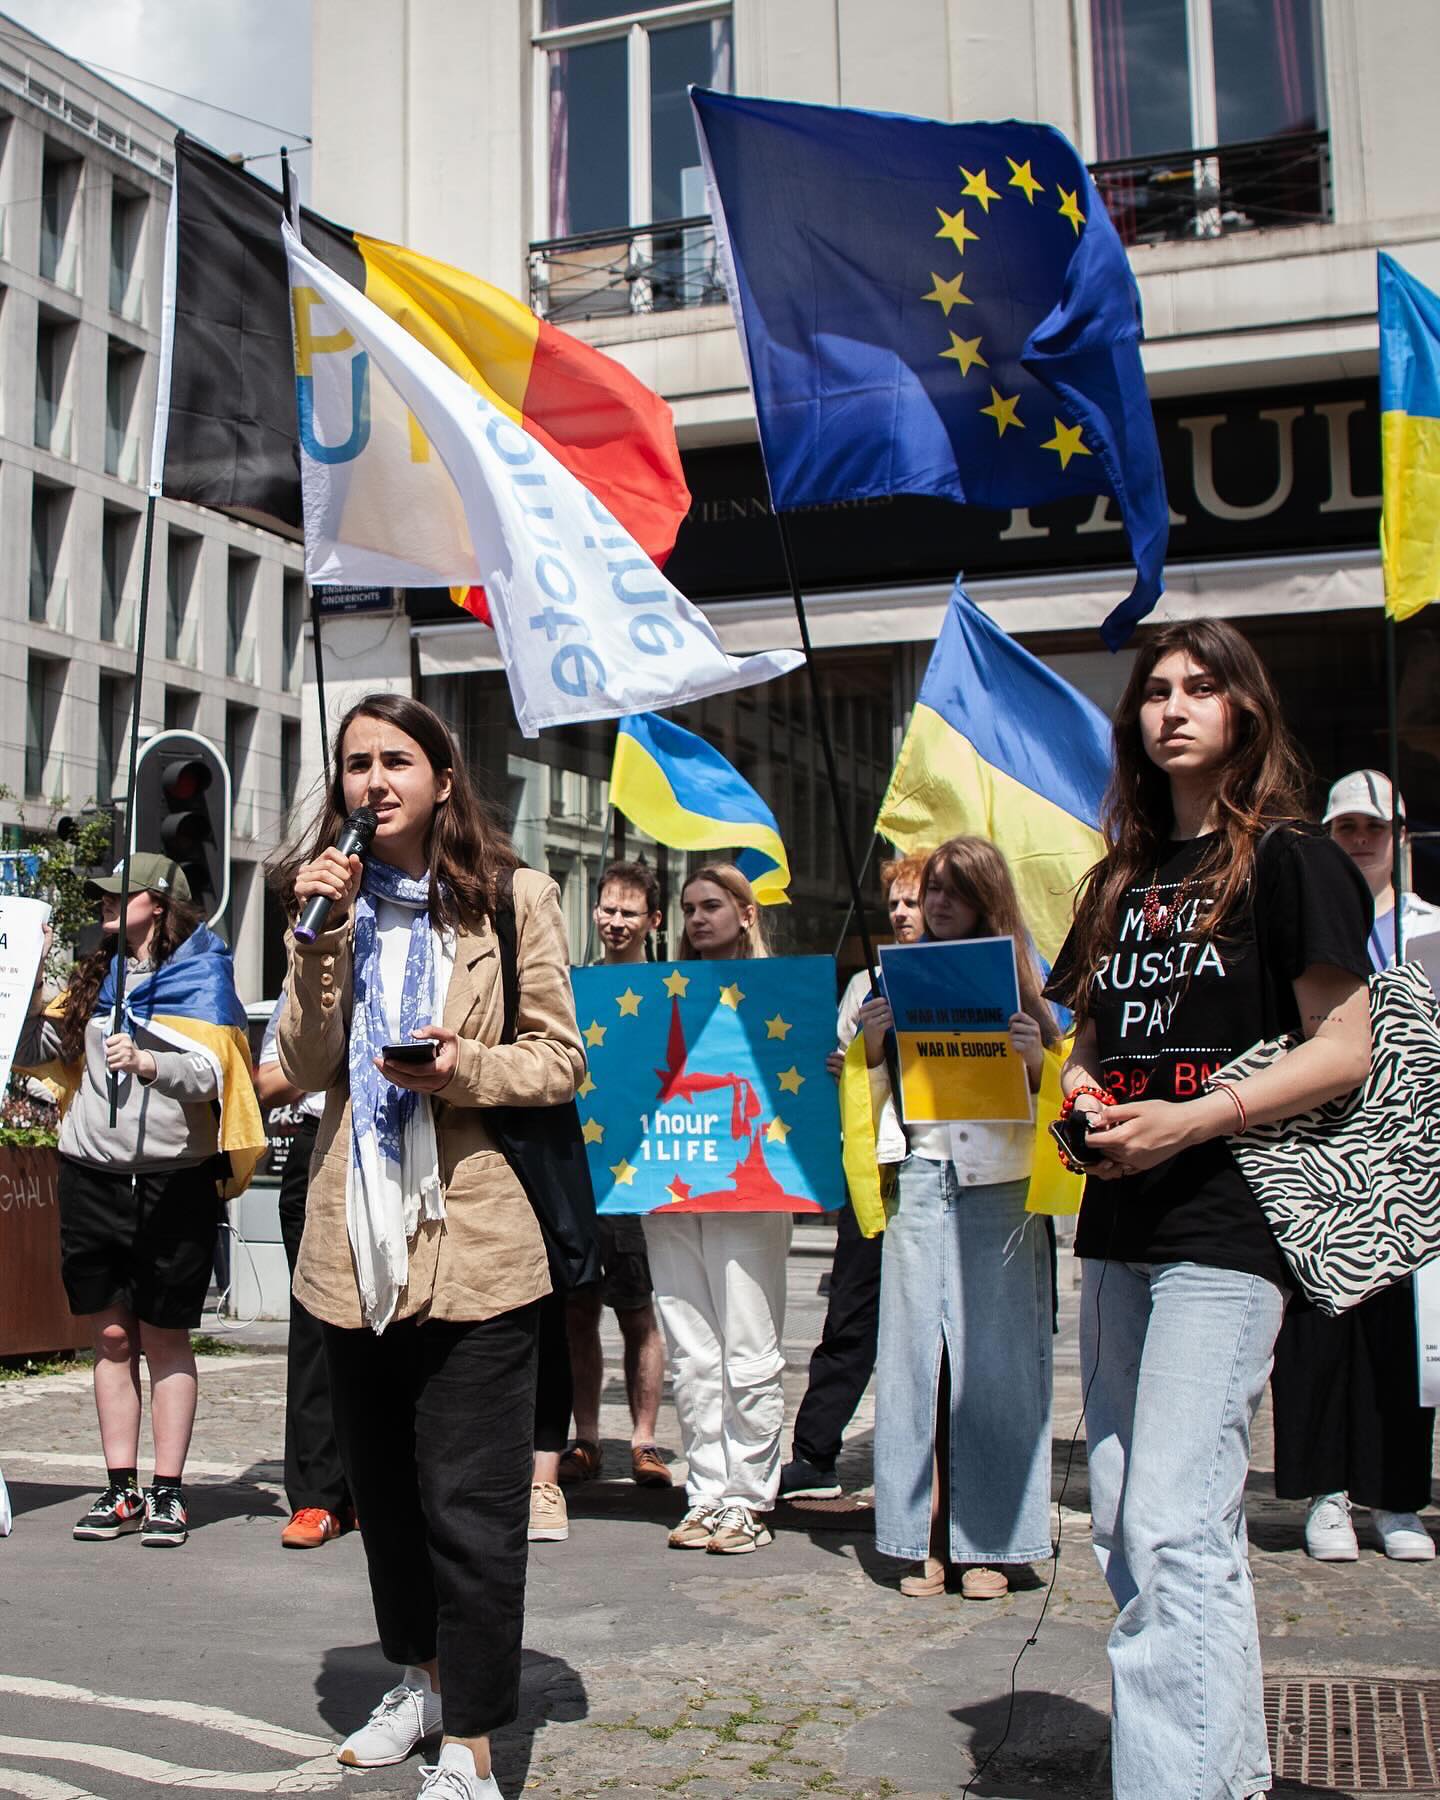 demonstration organized by Promote Ukraine and ICUV - International Centre for Ukrainian Victory took place near the Belgian Federal Parliament